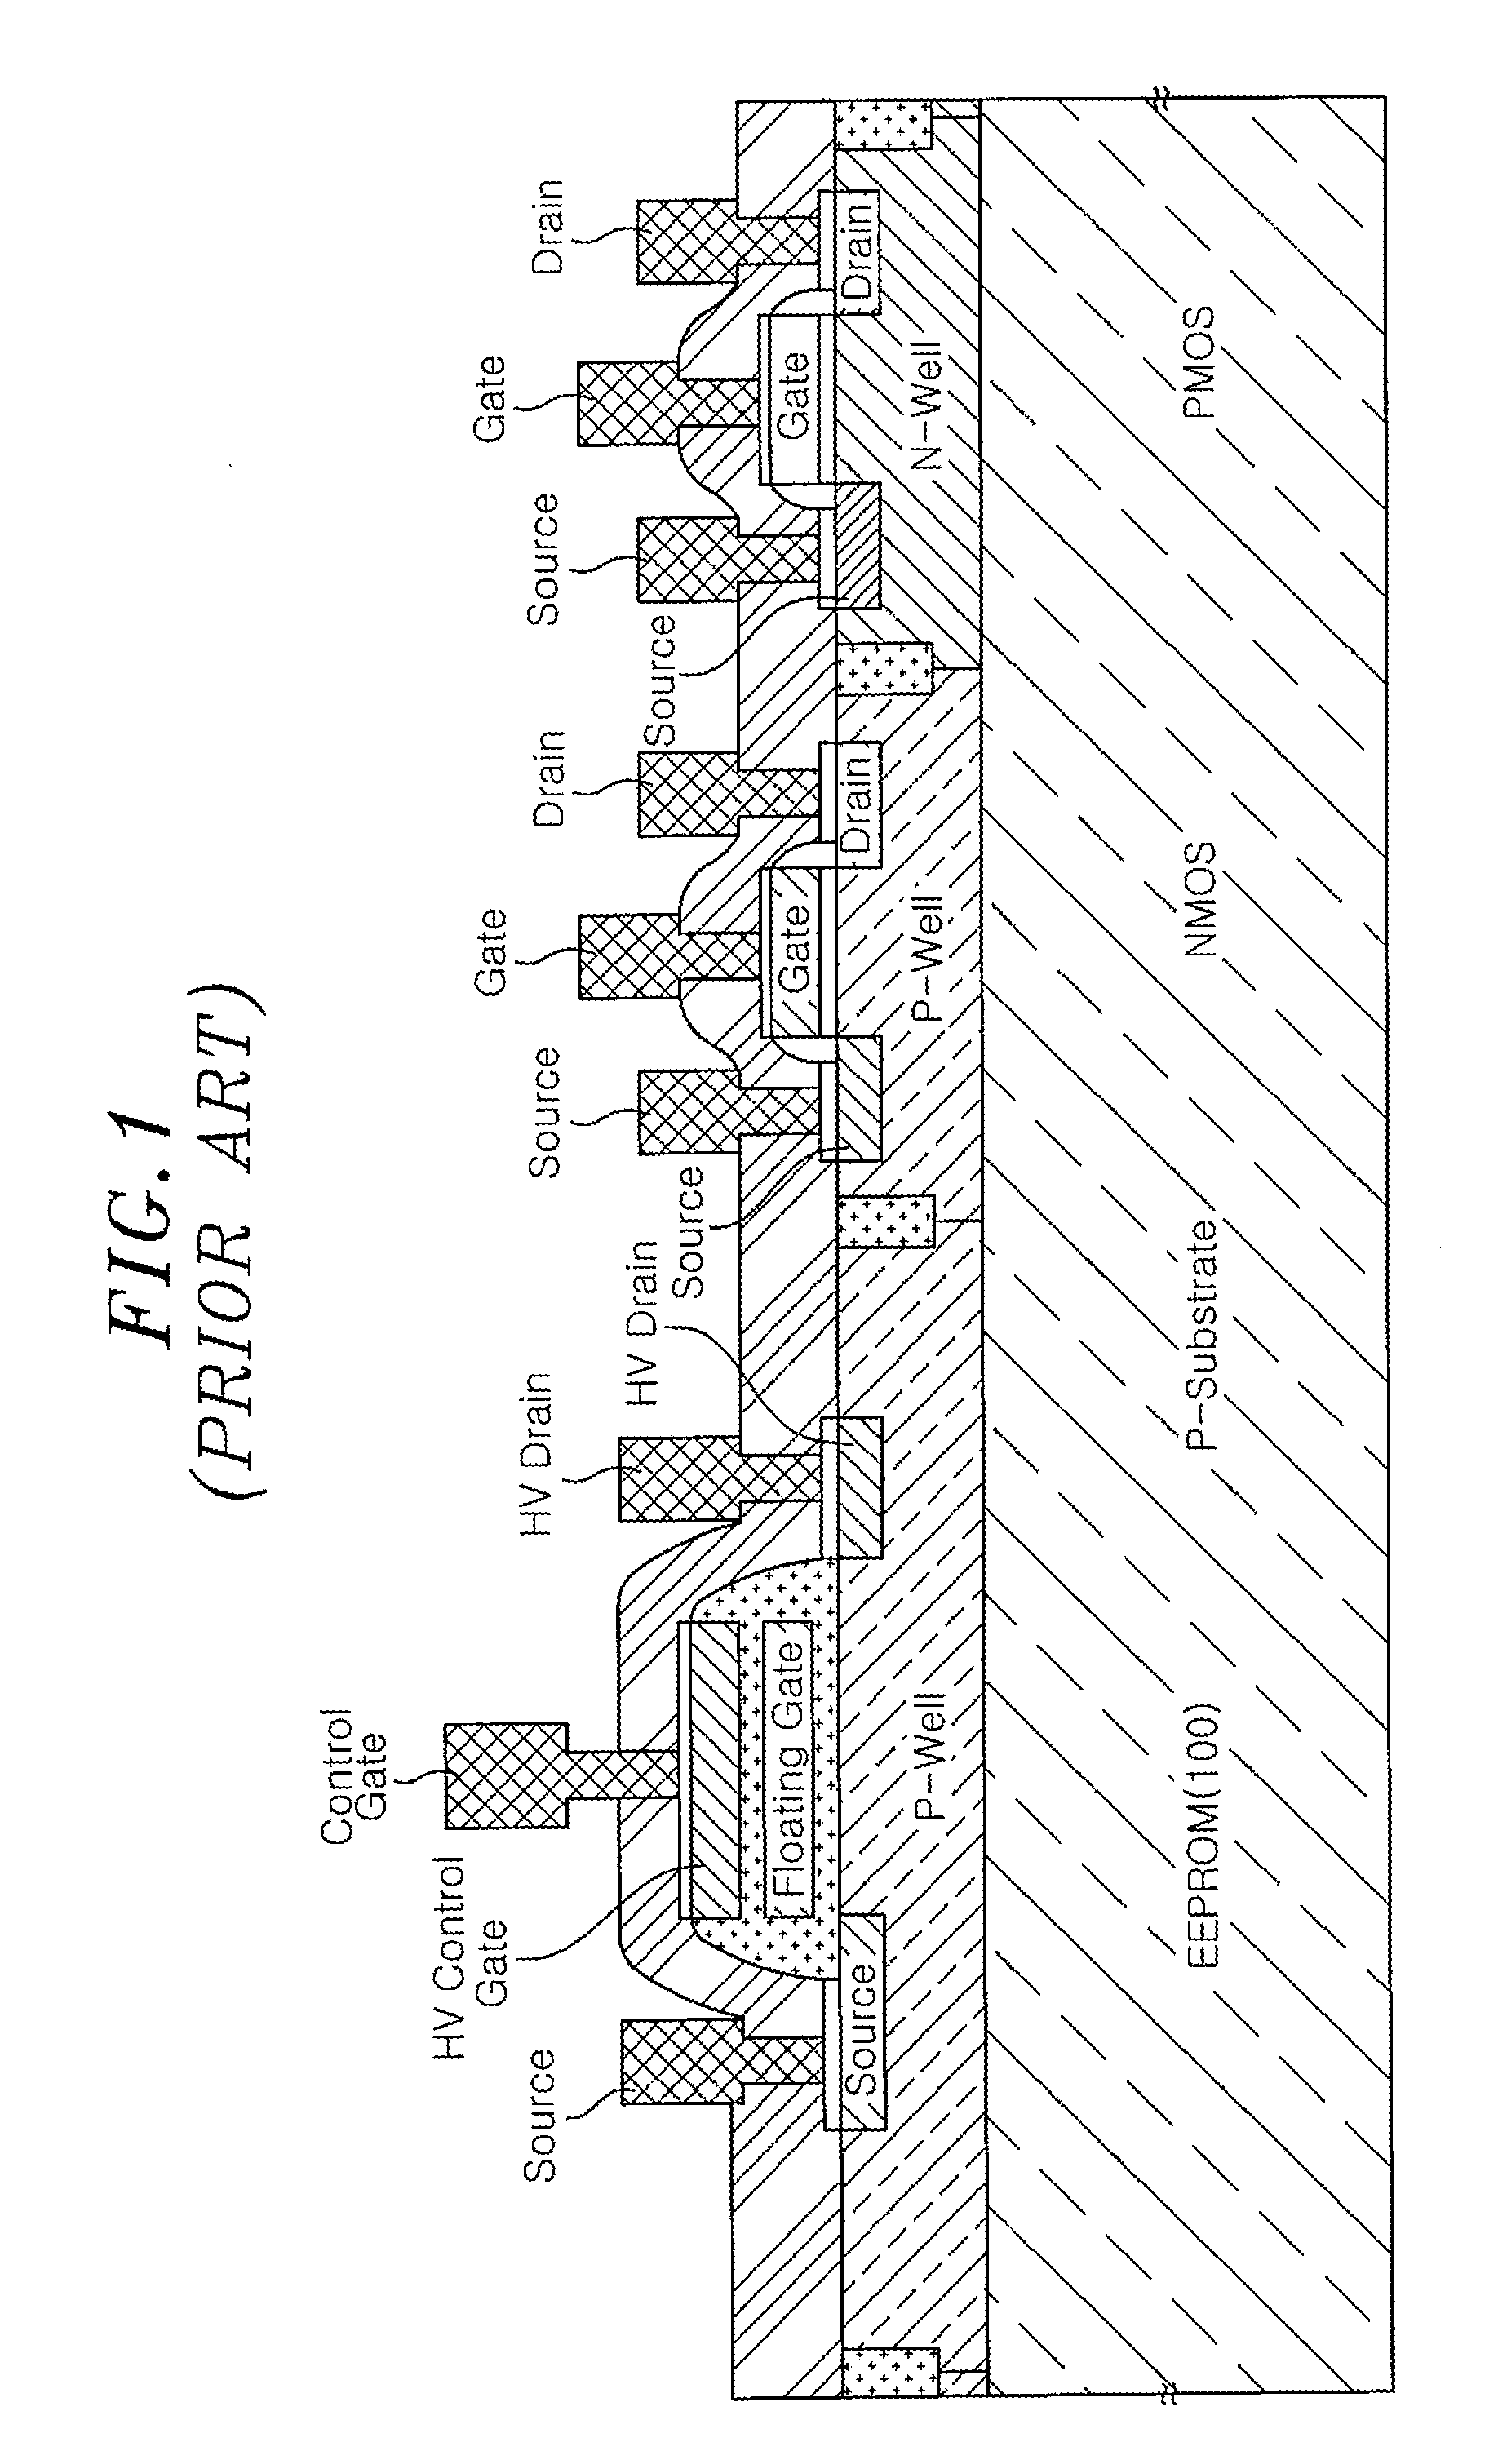 Electrically erasable programmable read-only memory and manufacturing method thereof